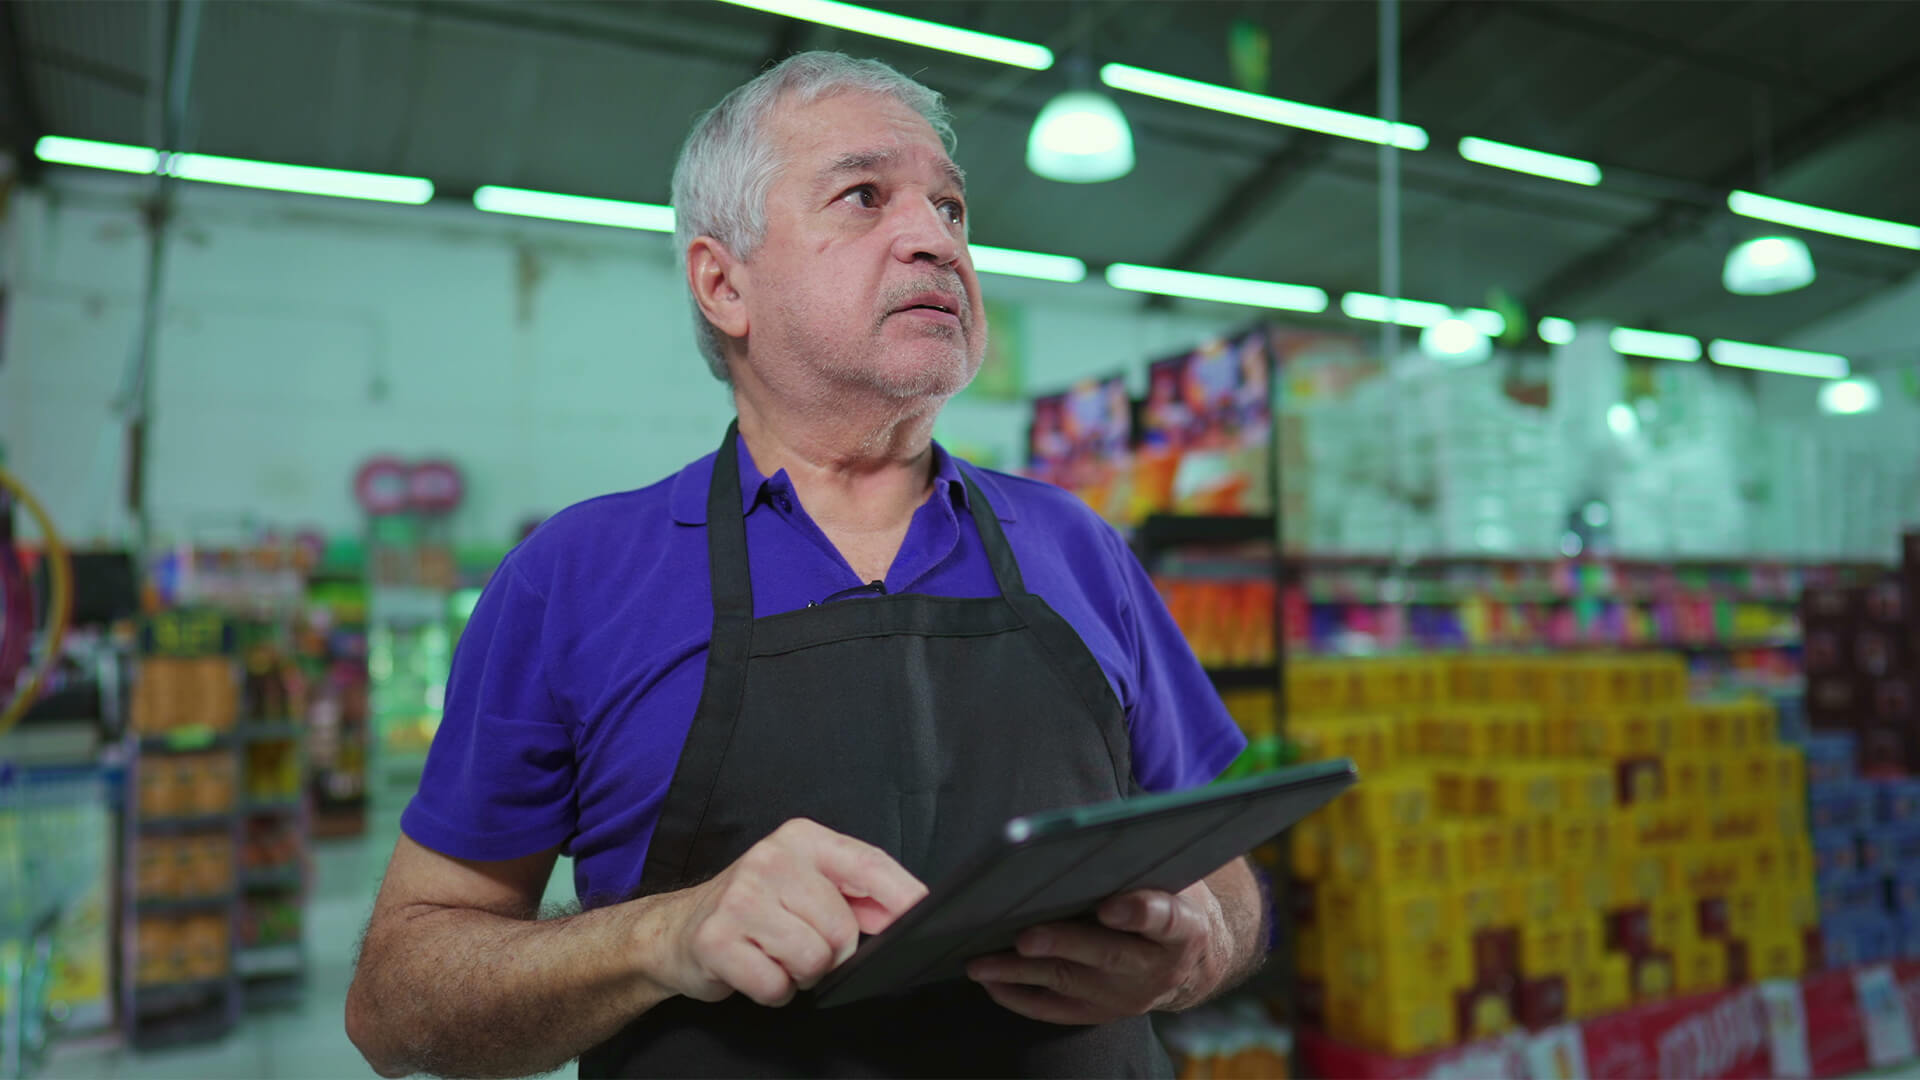 Grocery Store Manager Stressed Over Business Challenges